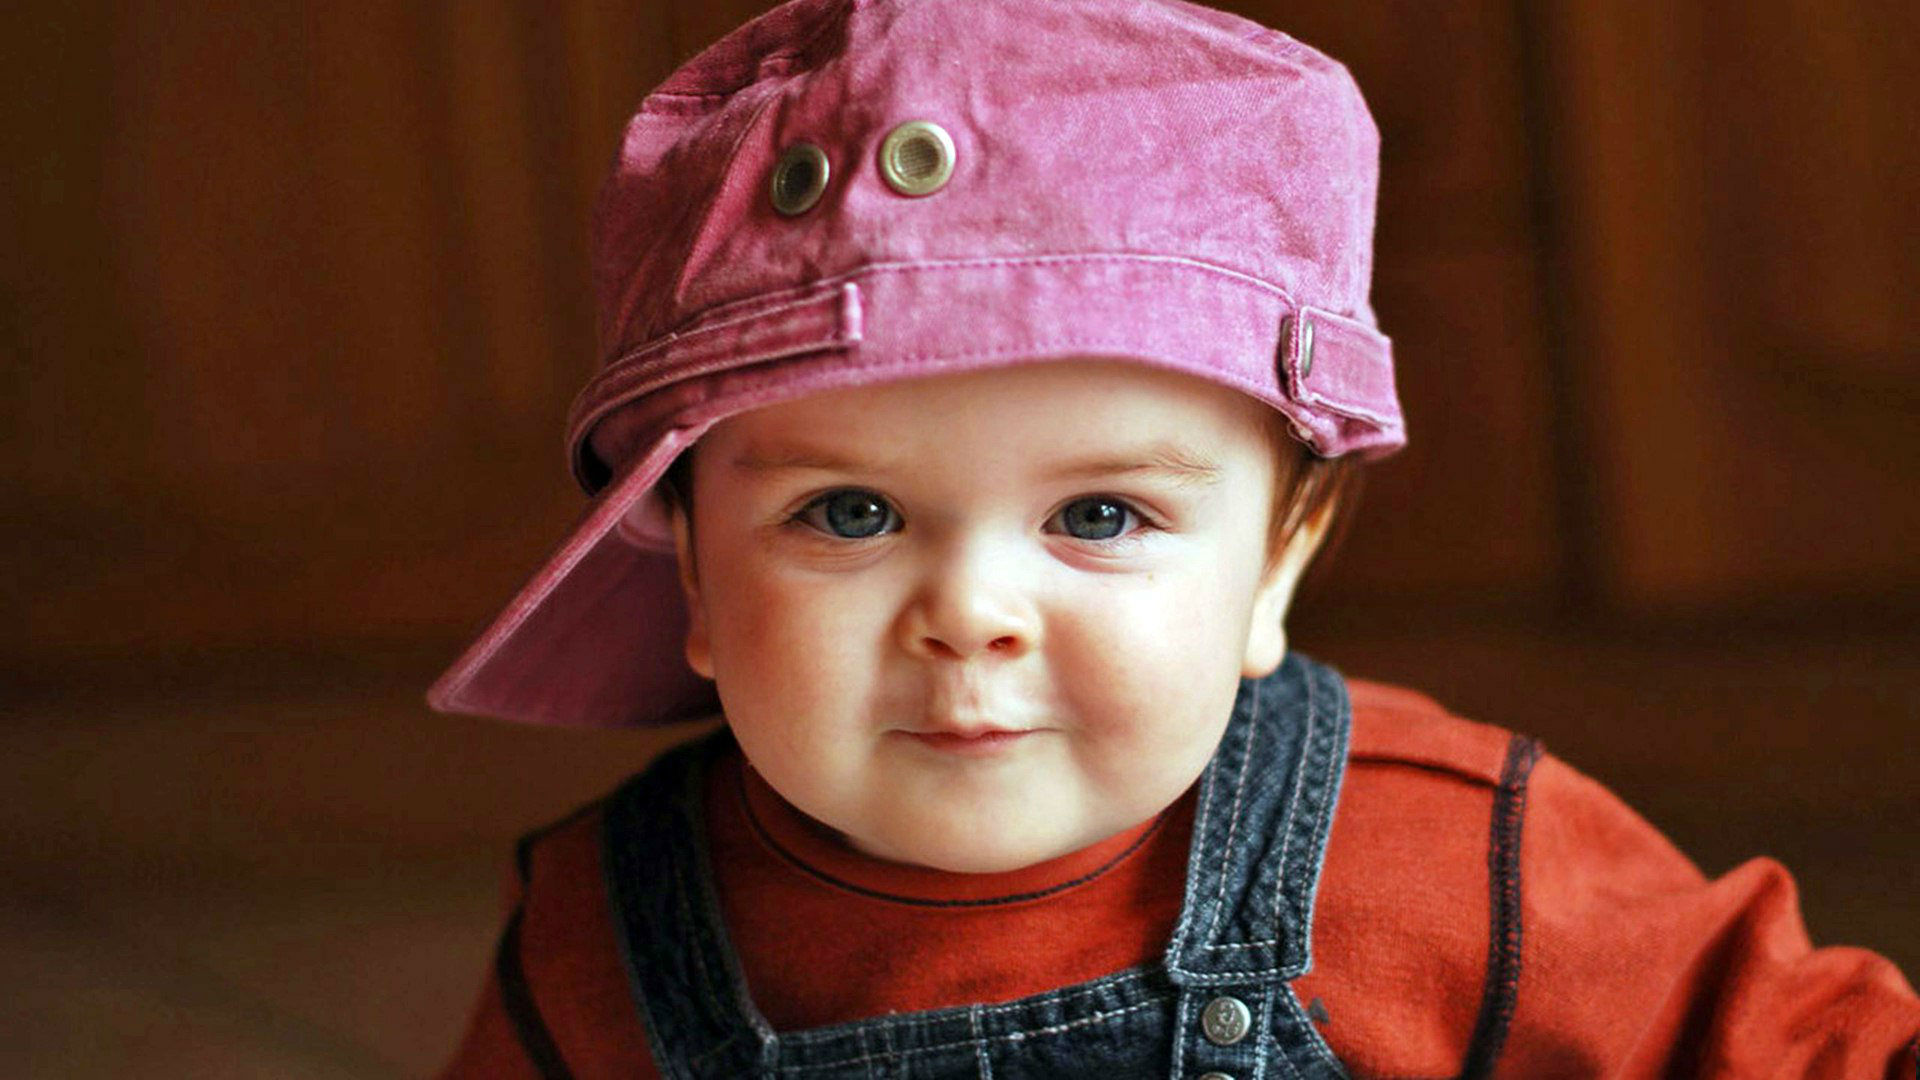 Cute Baby Boy HD Wallpapers Free Download HD Wallpapers